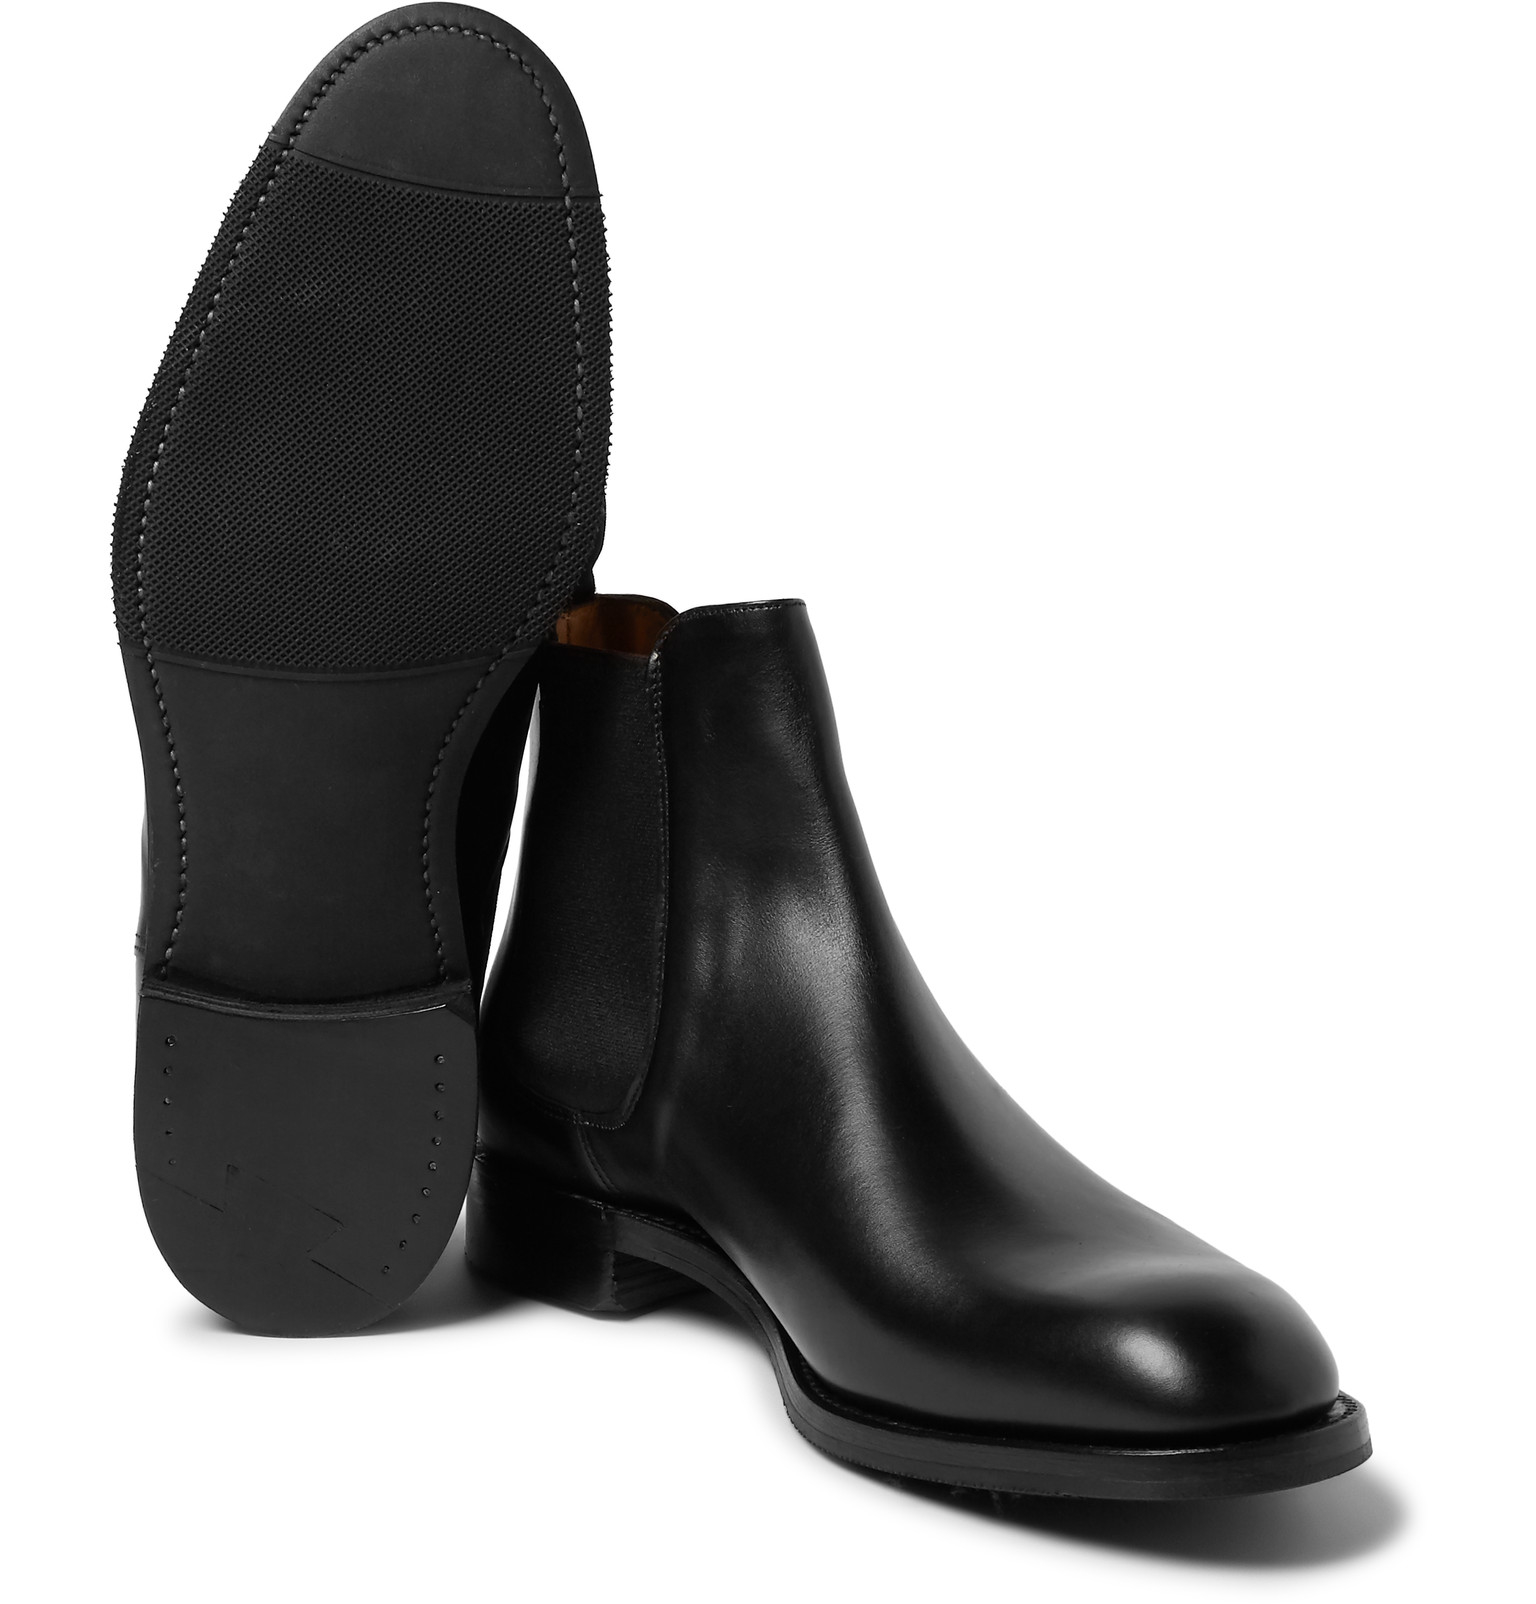 Cheaney Godfrey Leather Chelsea Boots in Black for Men - Lyst